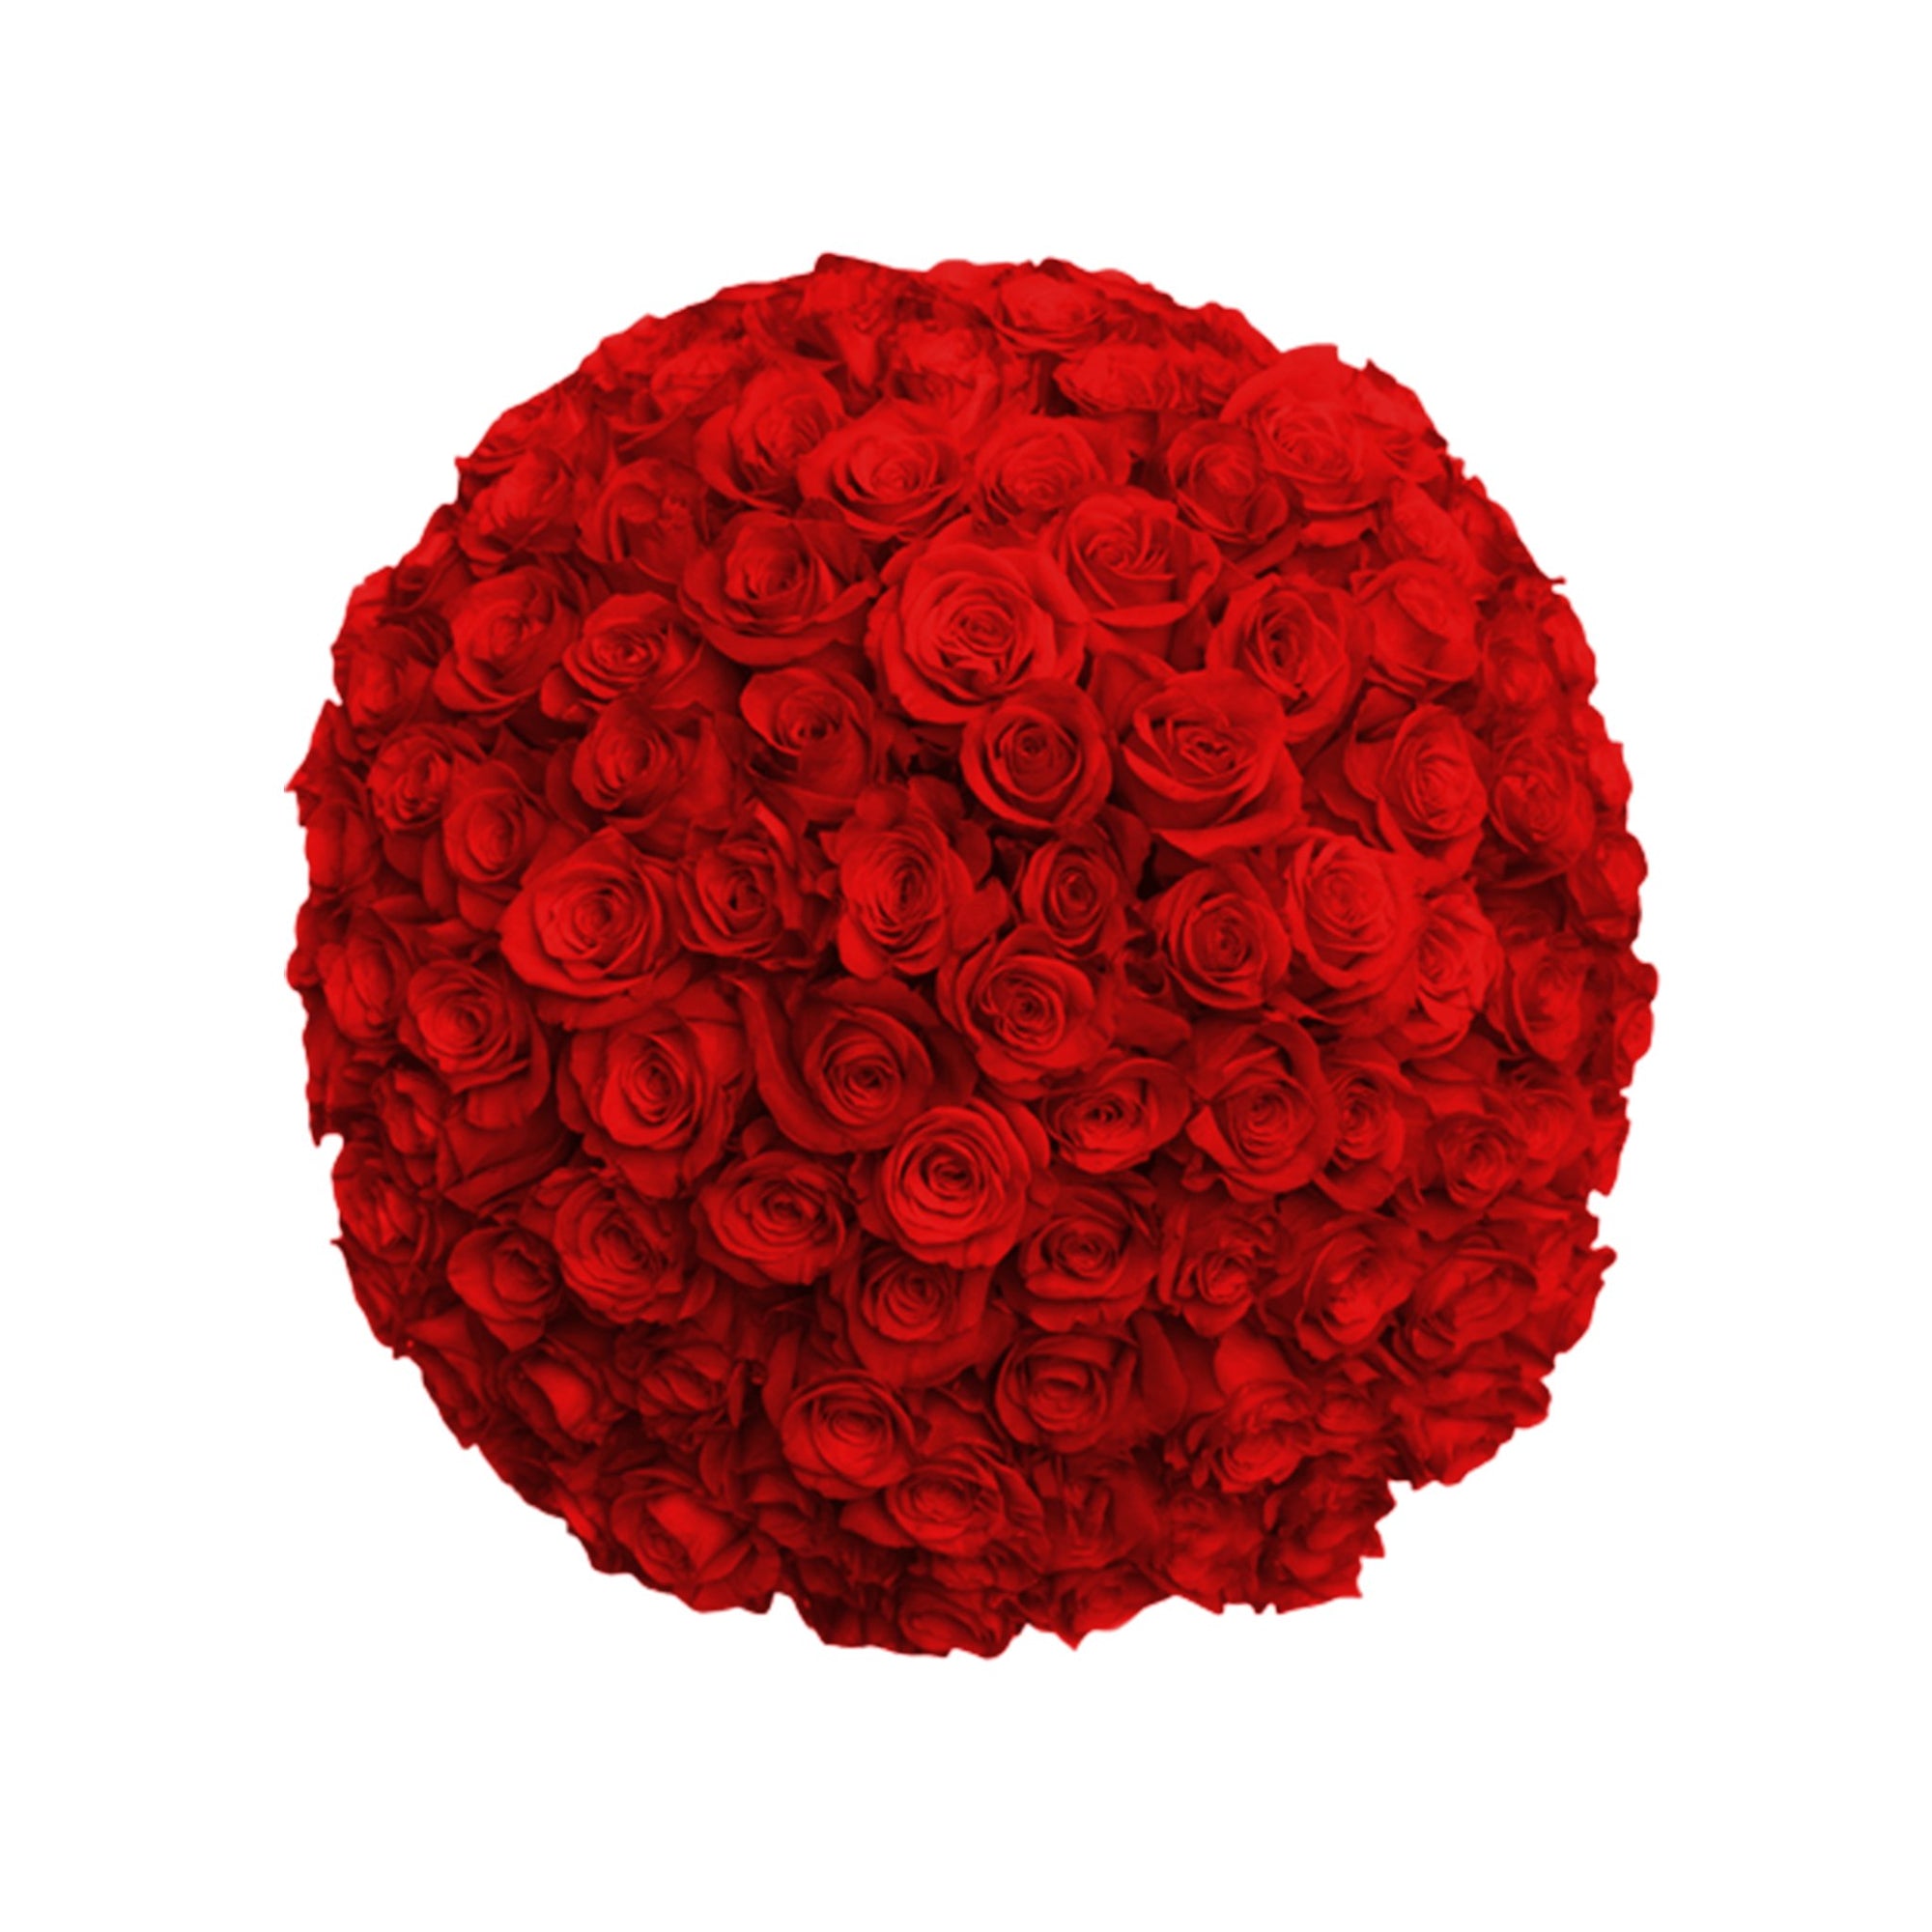 Manhattan Flower Delivery - Fresh Roses in a Vase | 100 Red Roses - Roses